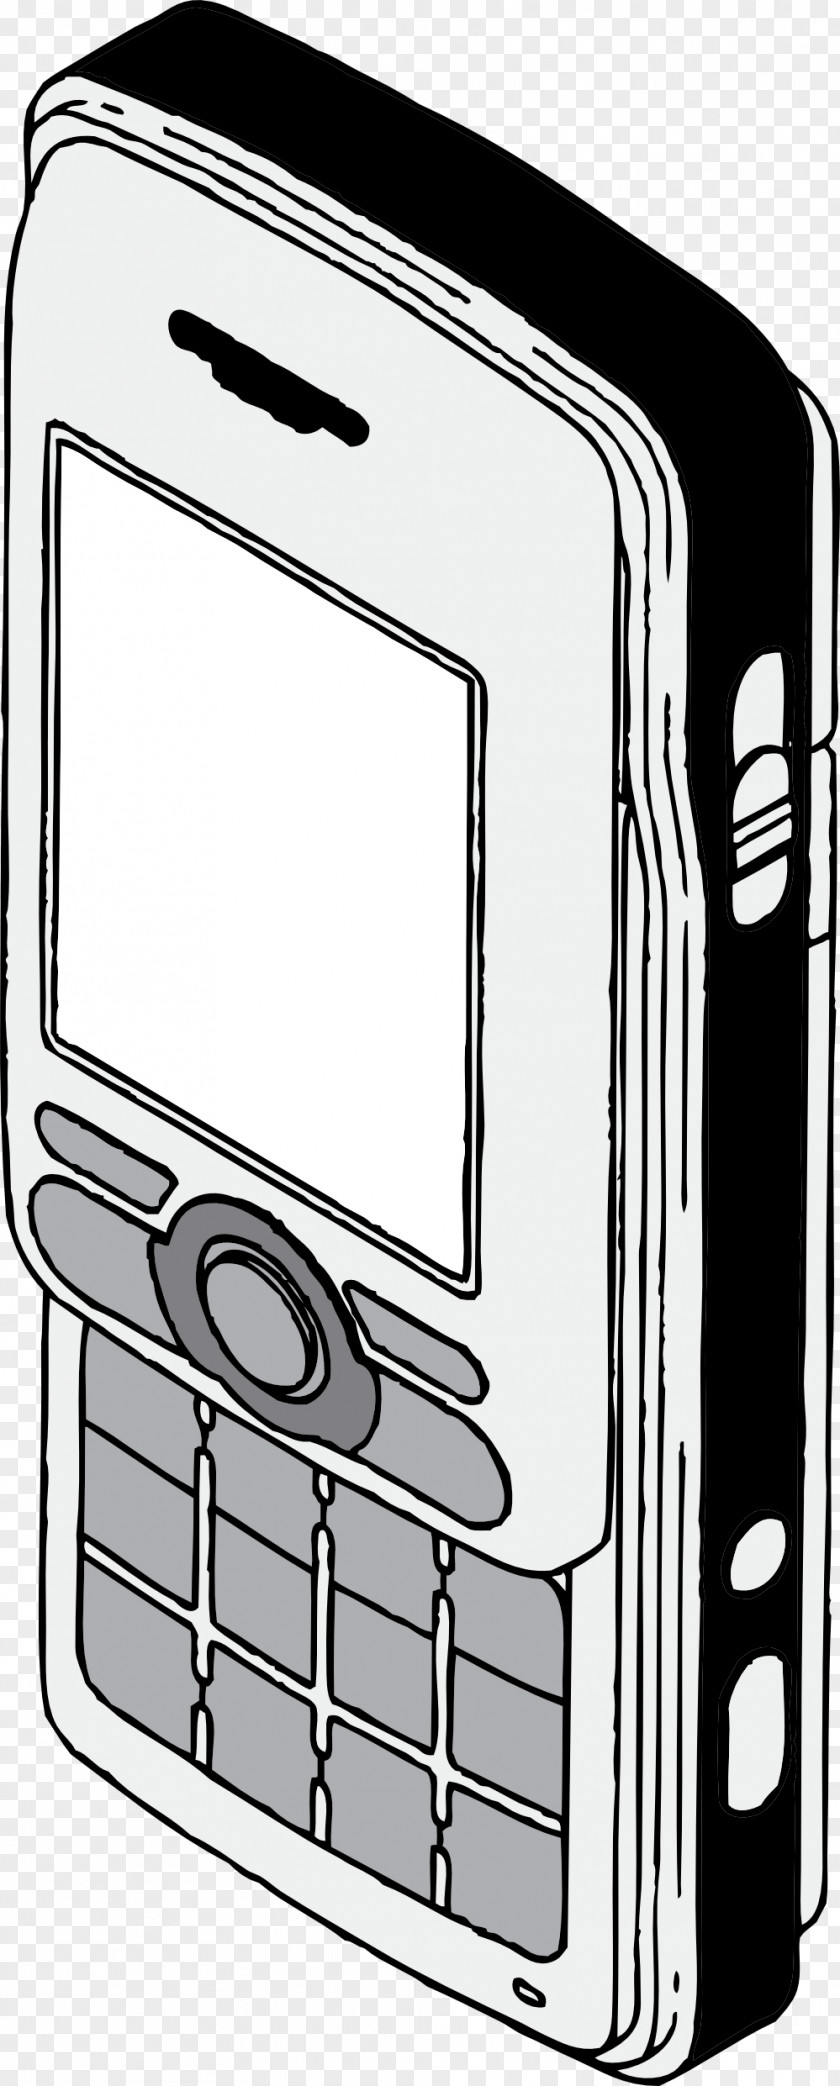 Iphone IPhone Line Art Telephone Coloring Book Clip PNG